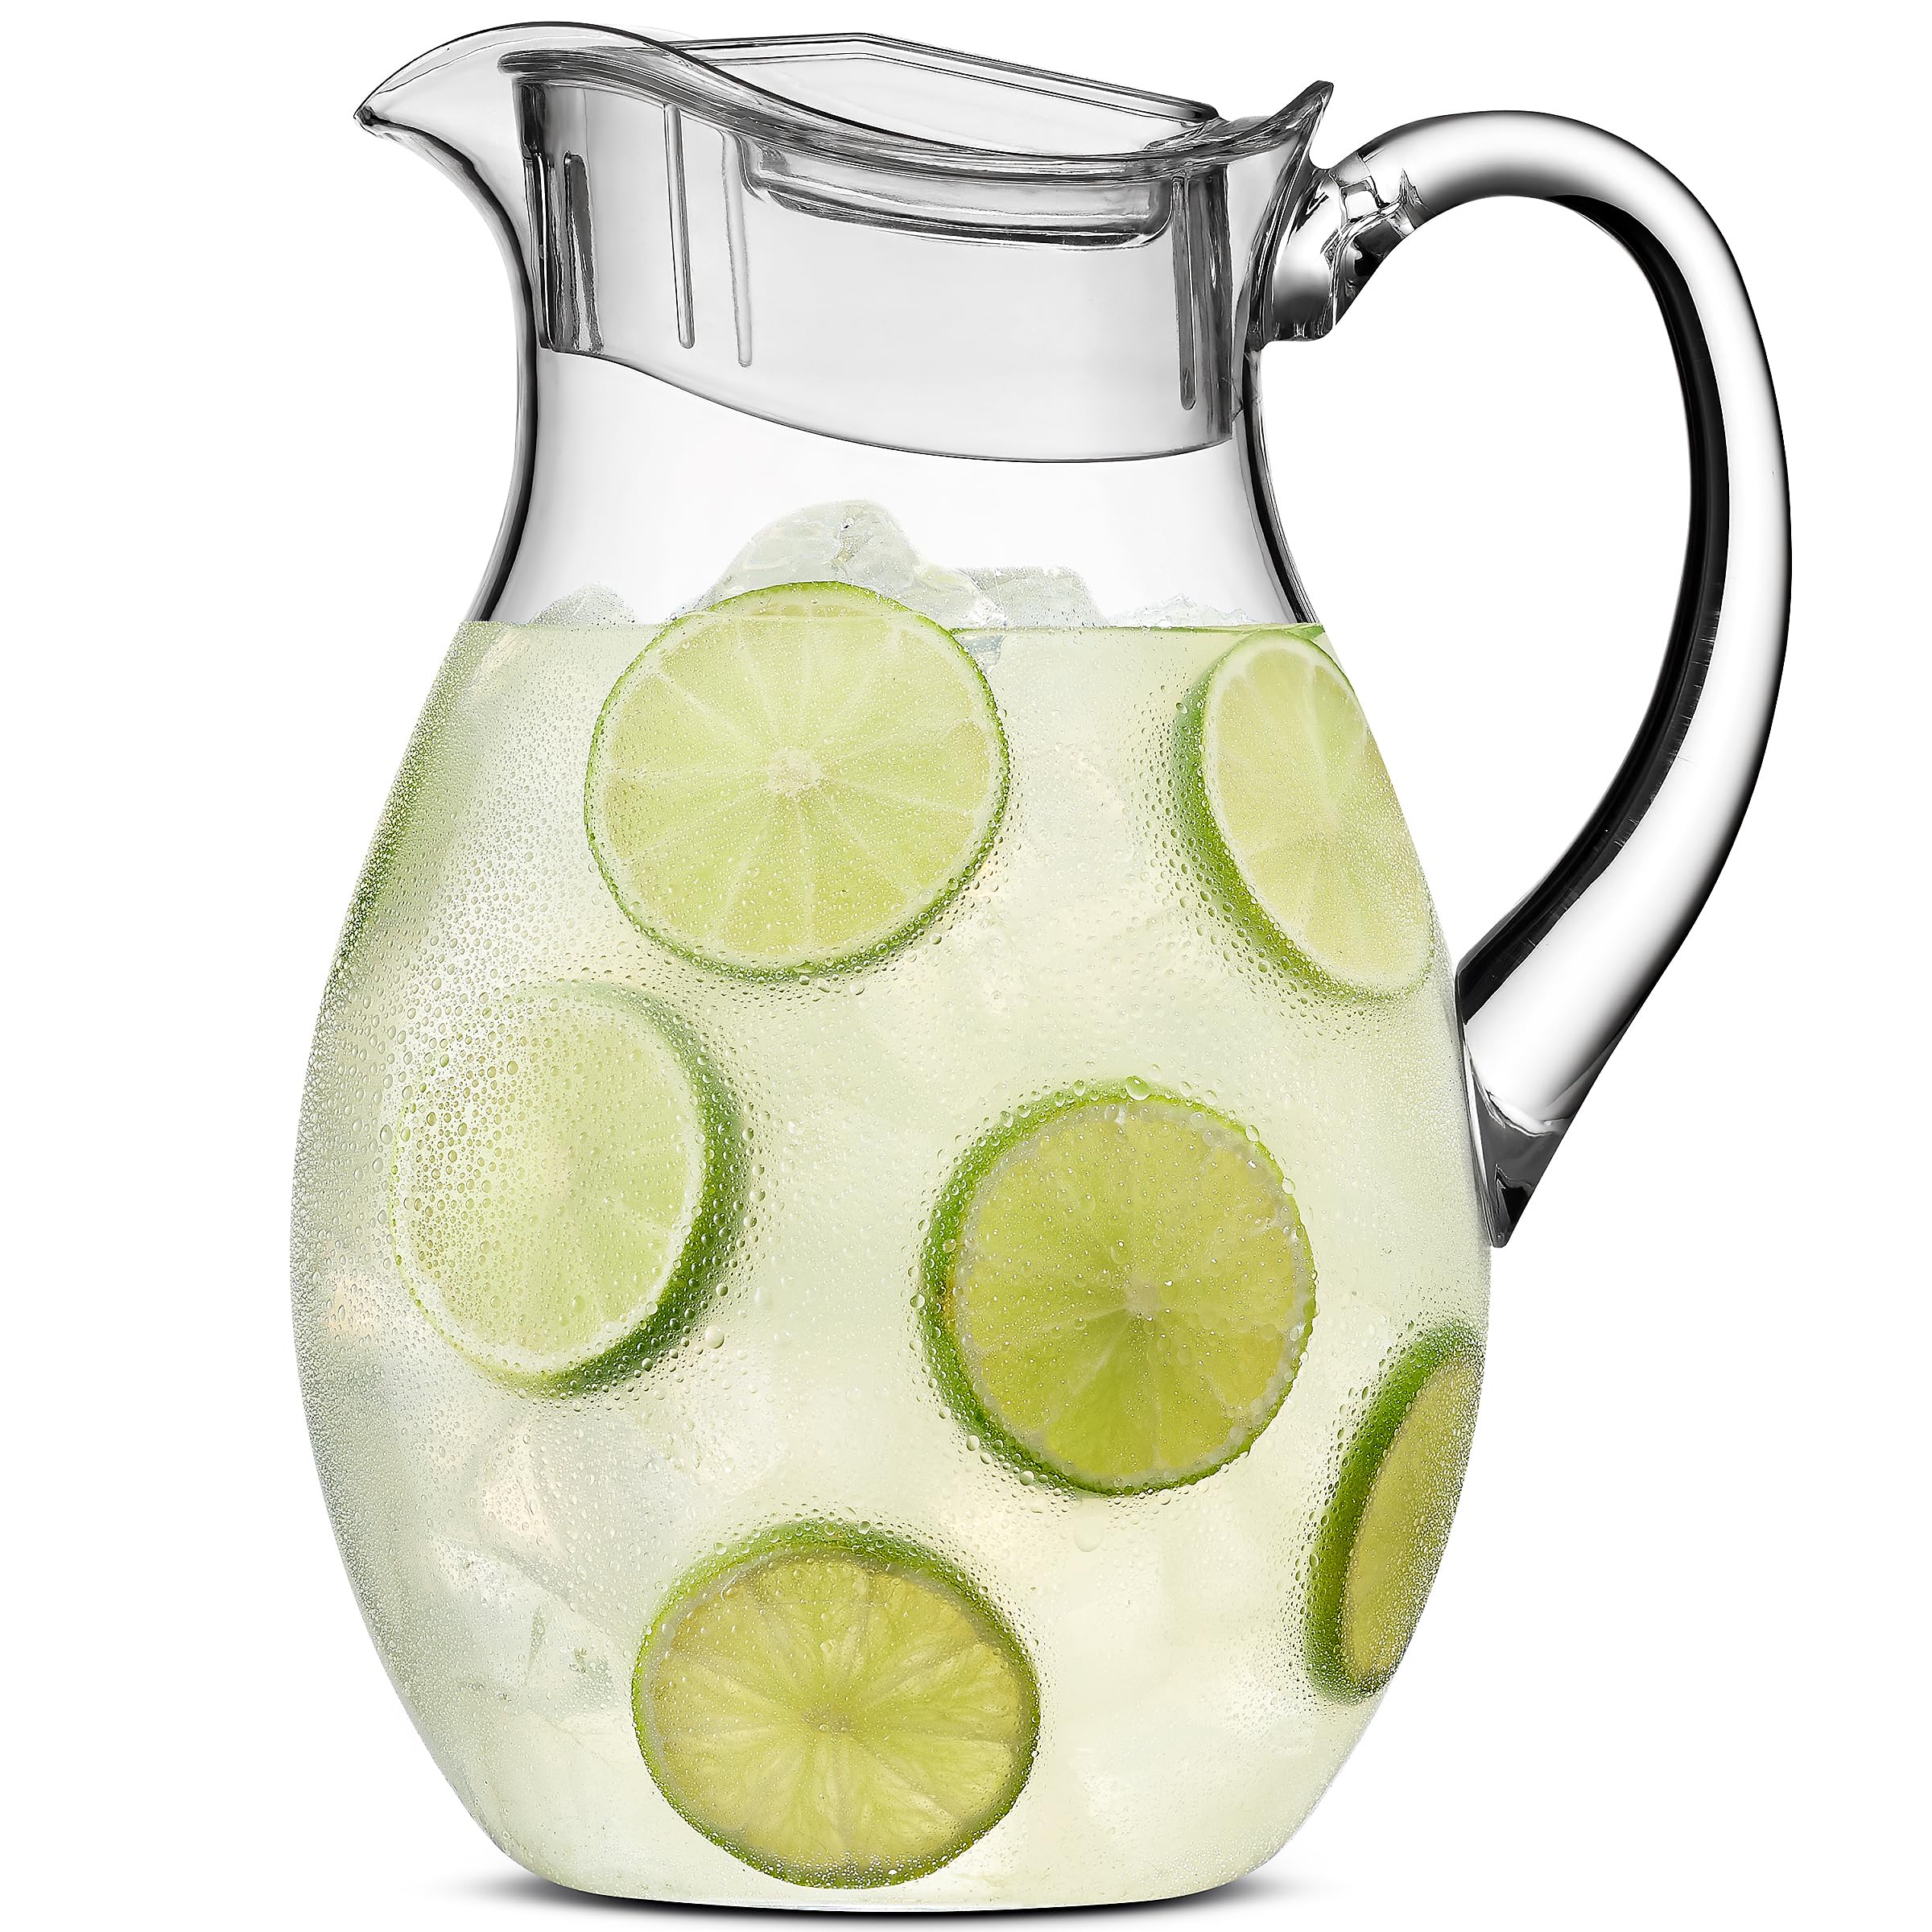 MosJos Acrylic Pitcher (72 oz), Clear Plastic, Water Pitcher with Lid, Shatterproof, BPA-Free Clear Pitcher, Ideal for Sangria, Lemonade, Juice, Iced Tea & More  - Like New